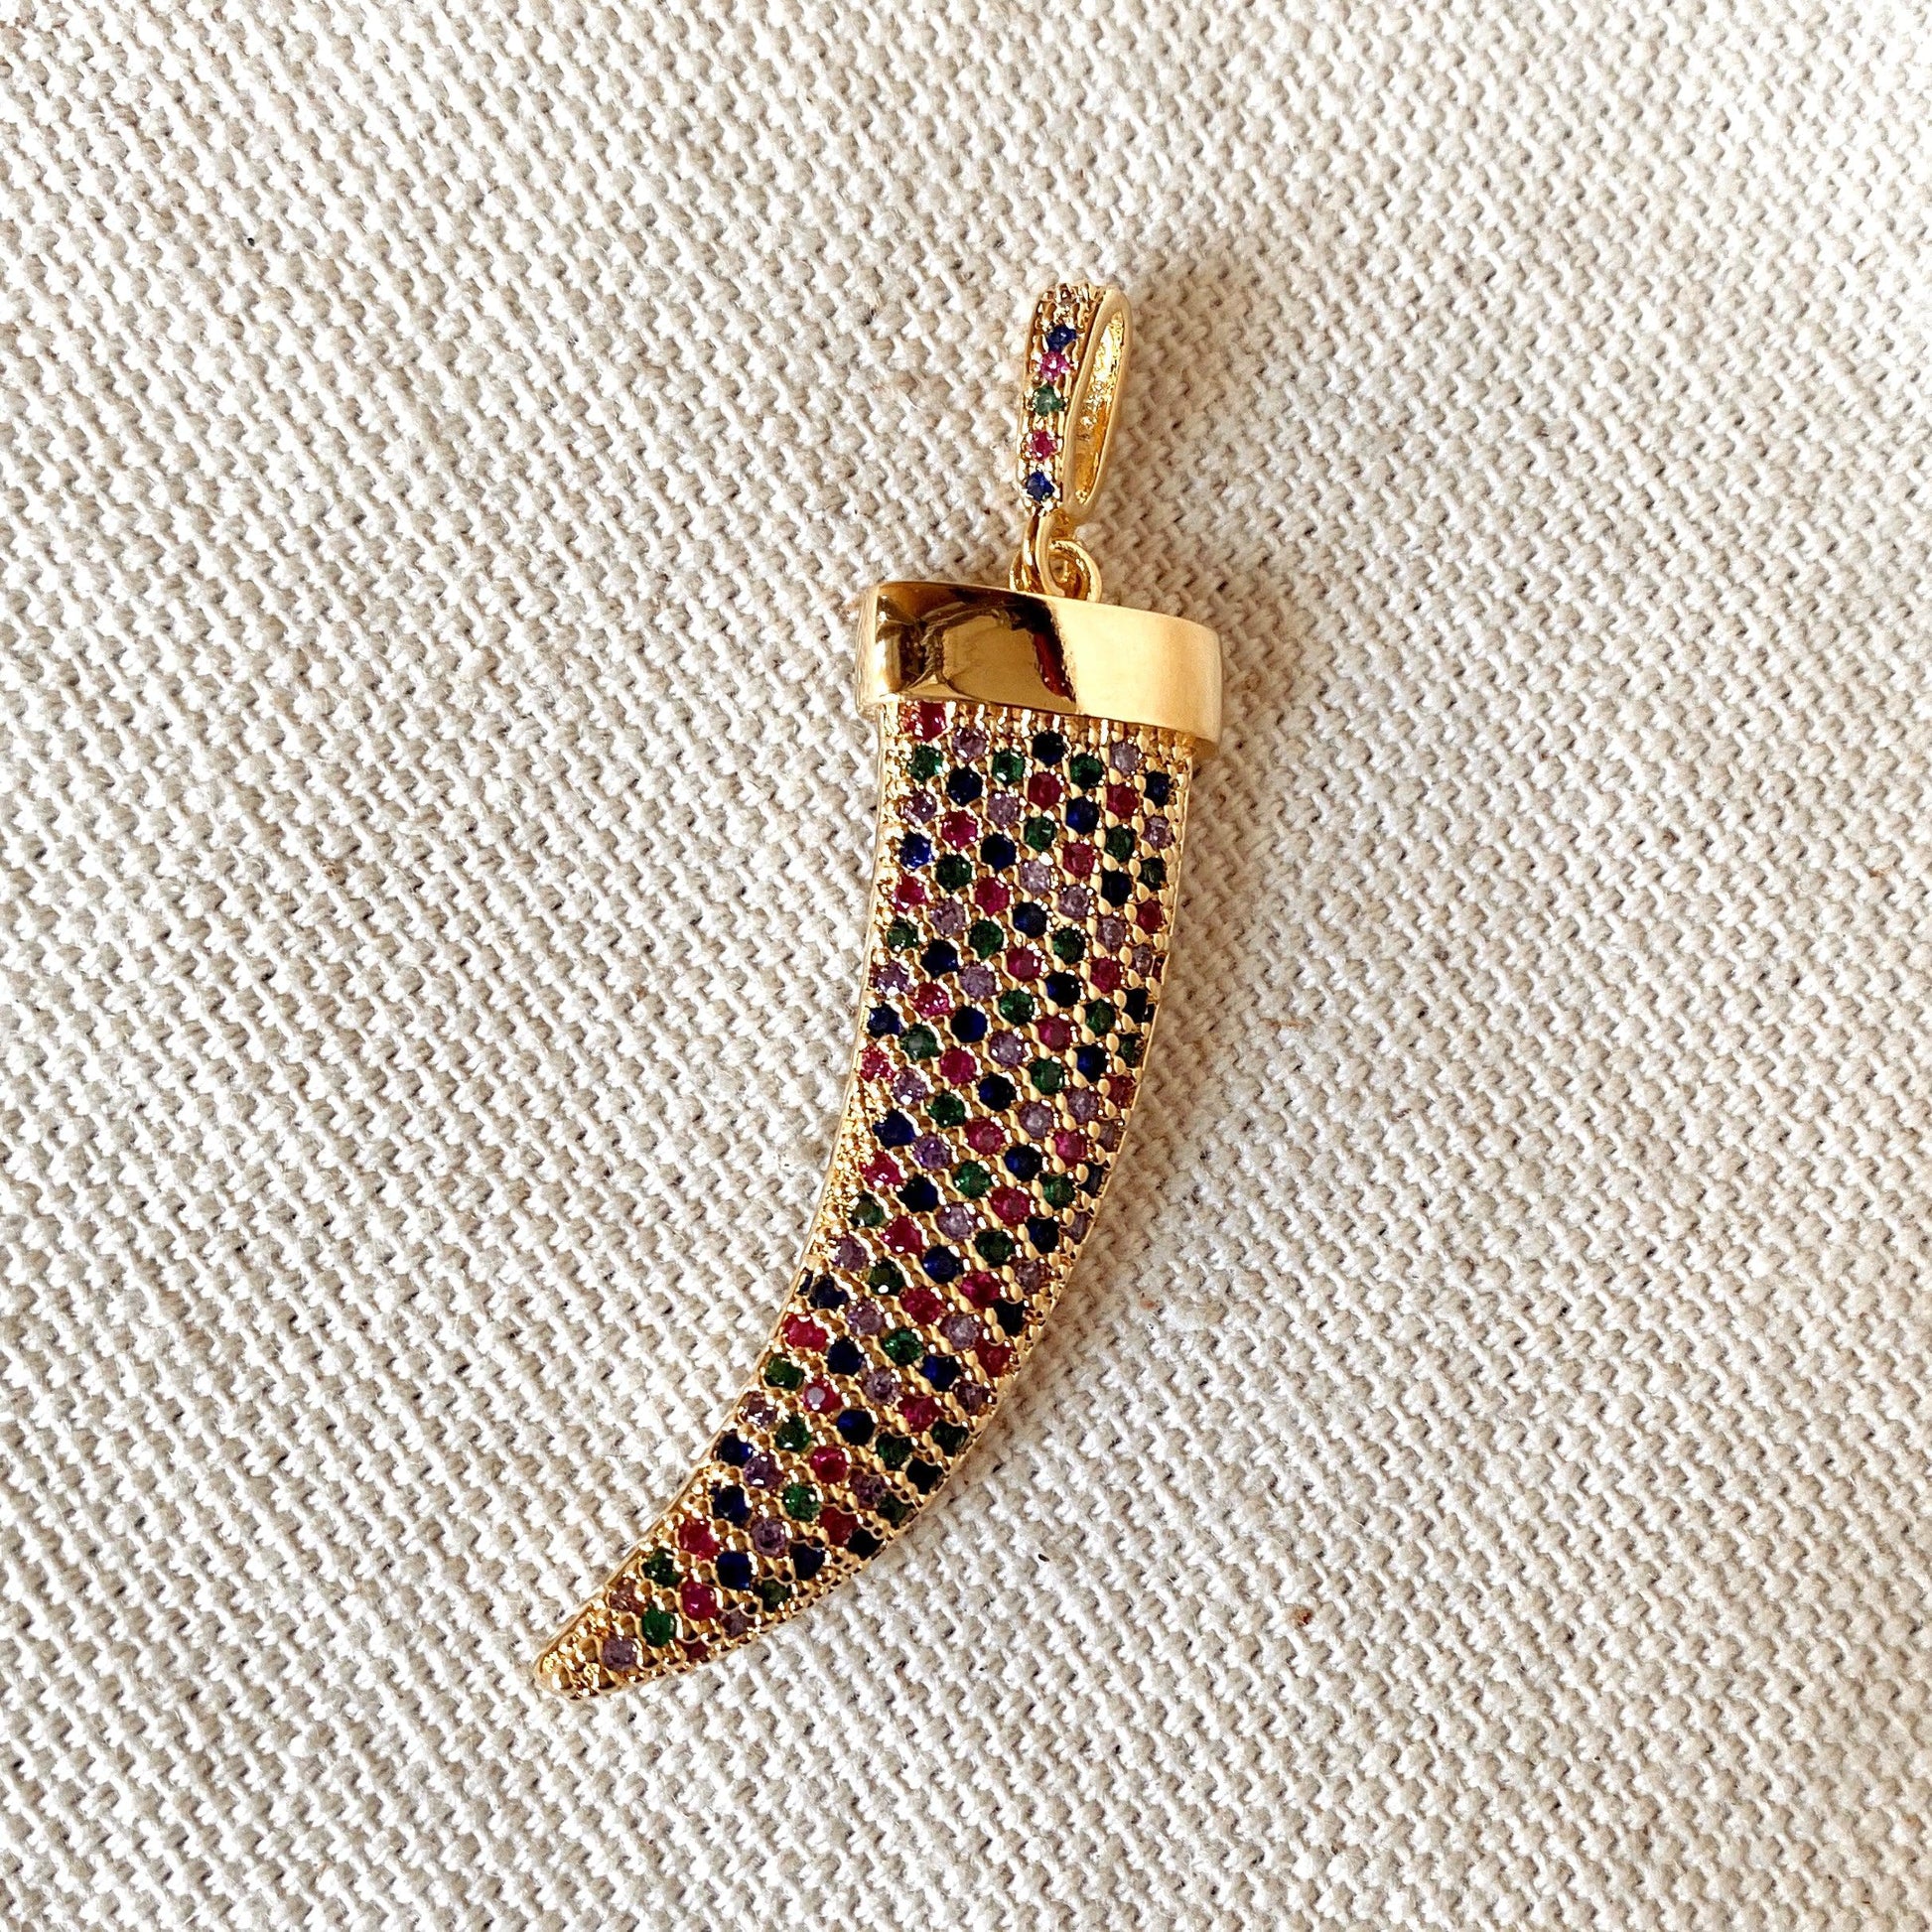 GoldFi Multicolor Cubic Zirconia Tusk Pendant Made of 18k Gold Filled